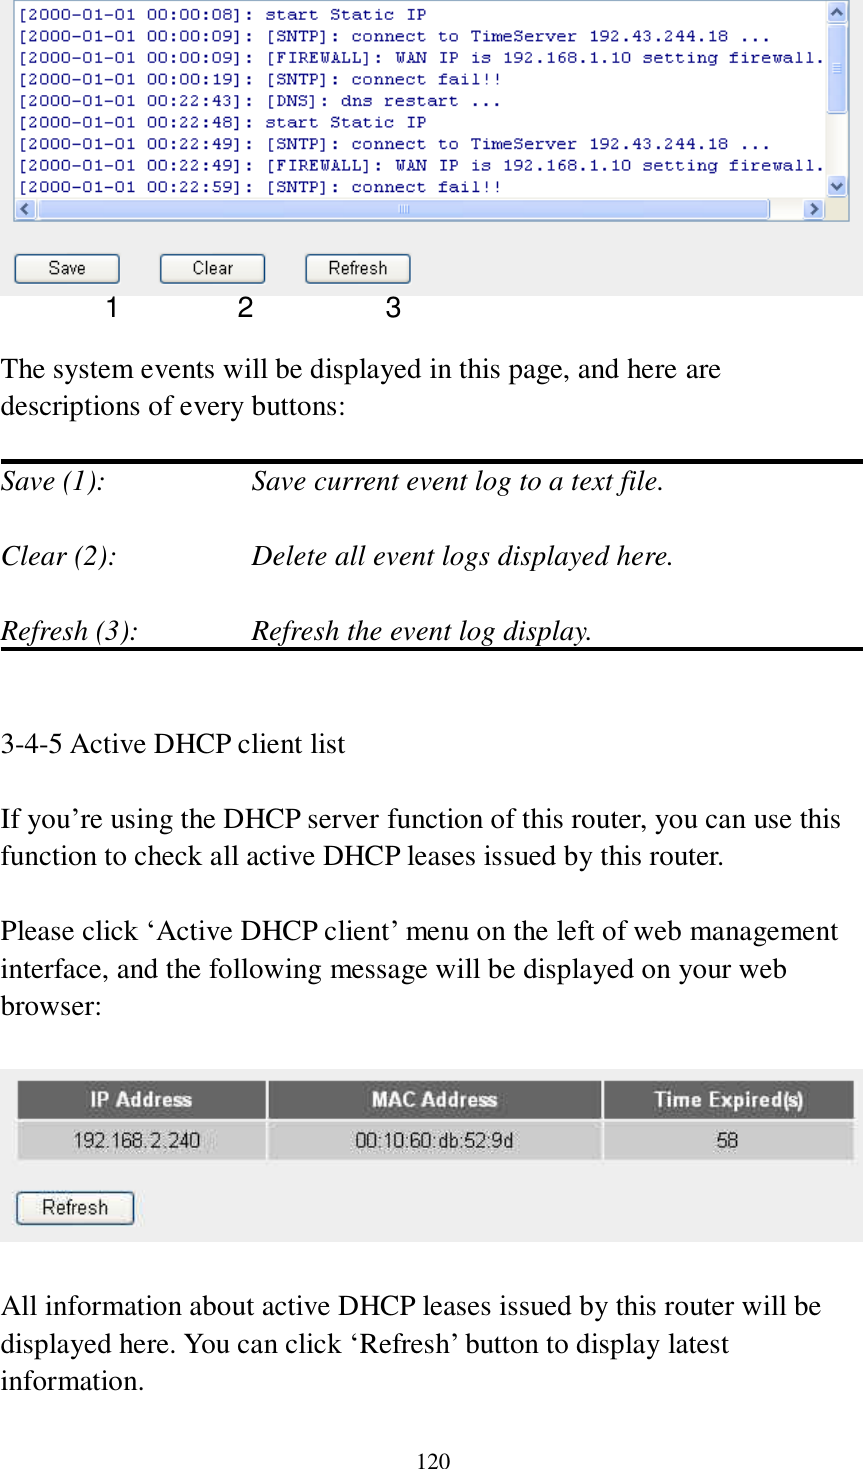 120   The system events will be displayed in this page, and here are descriptions of every buttons:  Save (1):        Save current event log to a text file.  Clear (2):        Delete all event logs displayed here.  Refresh (3):      Refresh the event log display.   3-4-5 Active DHCP client list  If you‟re using the DHCP server function of this router, you can use this function to check all active DHCP leases issued by this router.  Please click „Active DHCP client‟ menu on the left of web management interface, and the following message will be displayed on your web browser:    All information about active DHCP leases issued by this router will be displayed here. You can click „Refresh‟ button to display latest information. 1 2 3 